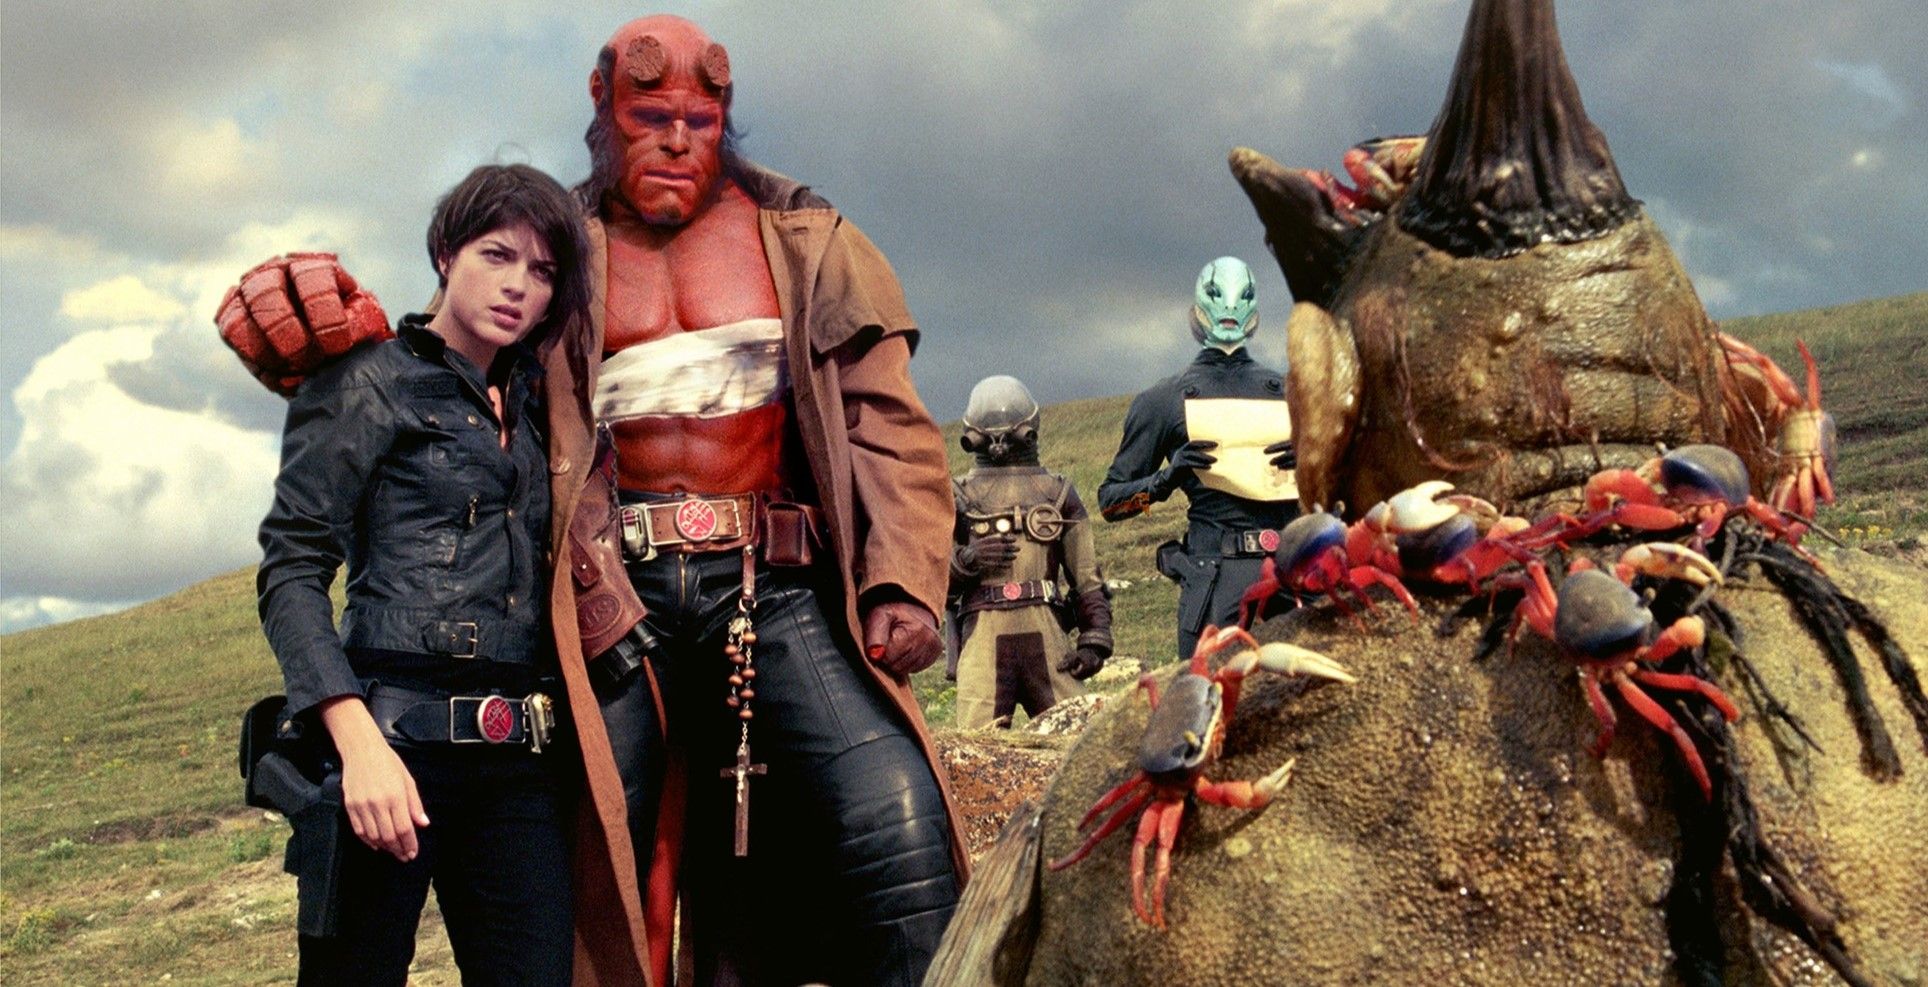 Hellboy 3: Ron Perlman Not Eager to Return, but 'We Owe It to Fans'